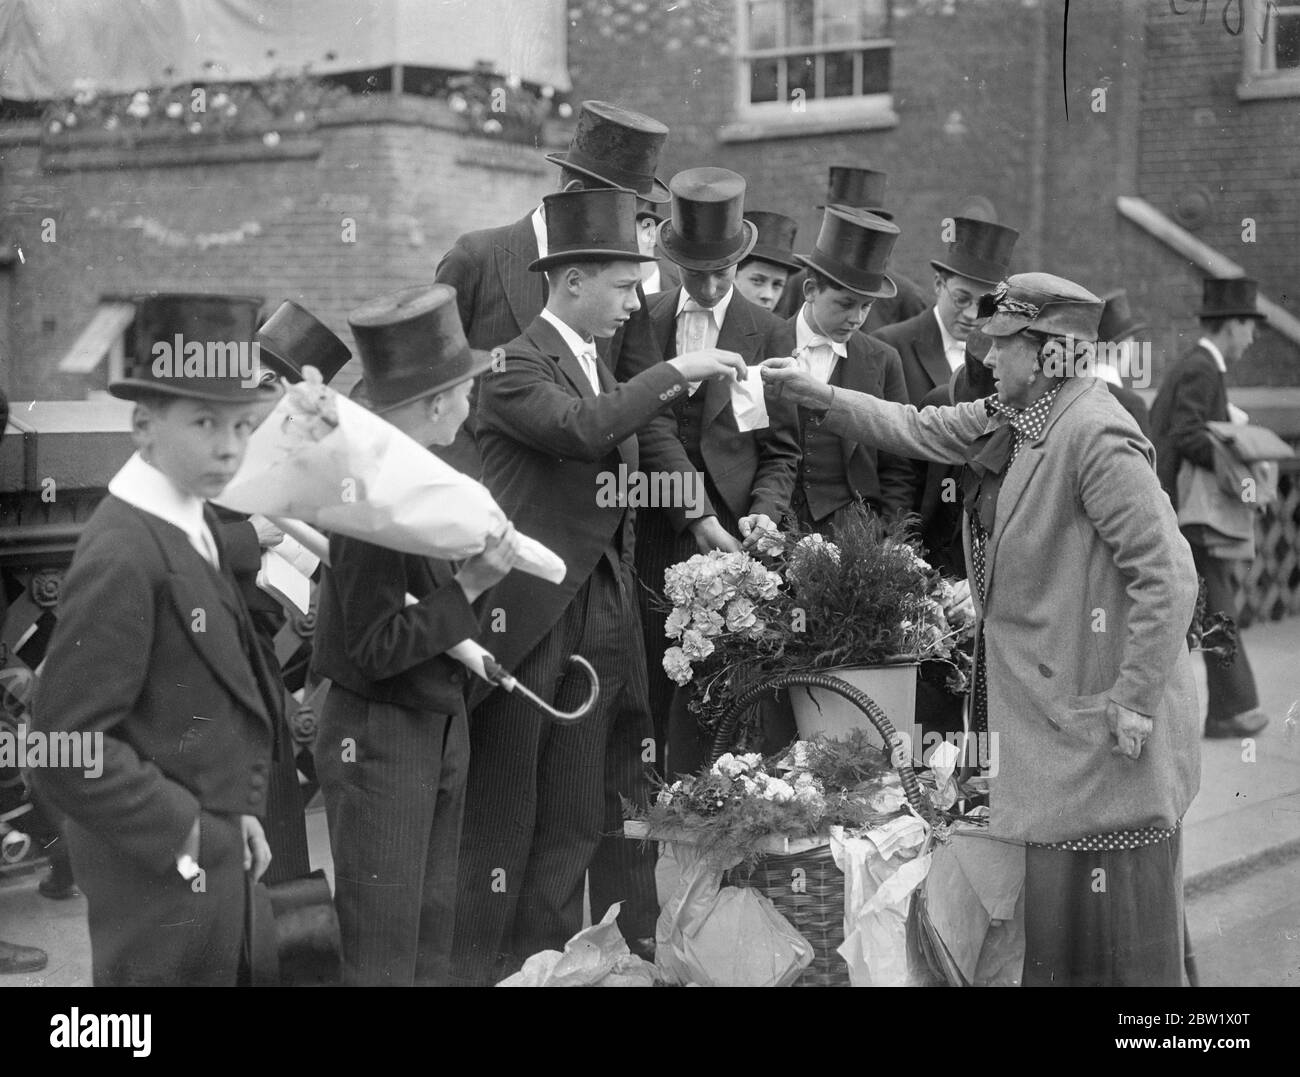 Eton boys buy fourth of June flowers. With a full programme of events, Eton College celebrated 4 June. The Coronation 'Fourth' was expected to be the most brilliant of any post-war year. Photo shows, Eton boys selecting their fourth of June flowers . 4 June 1937 Stock Photo